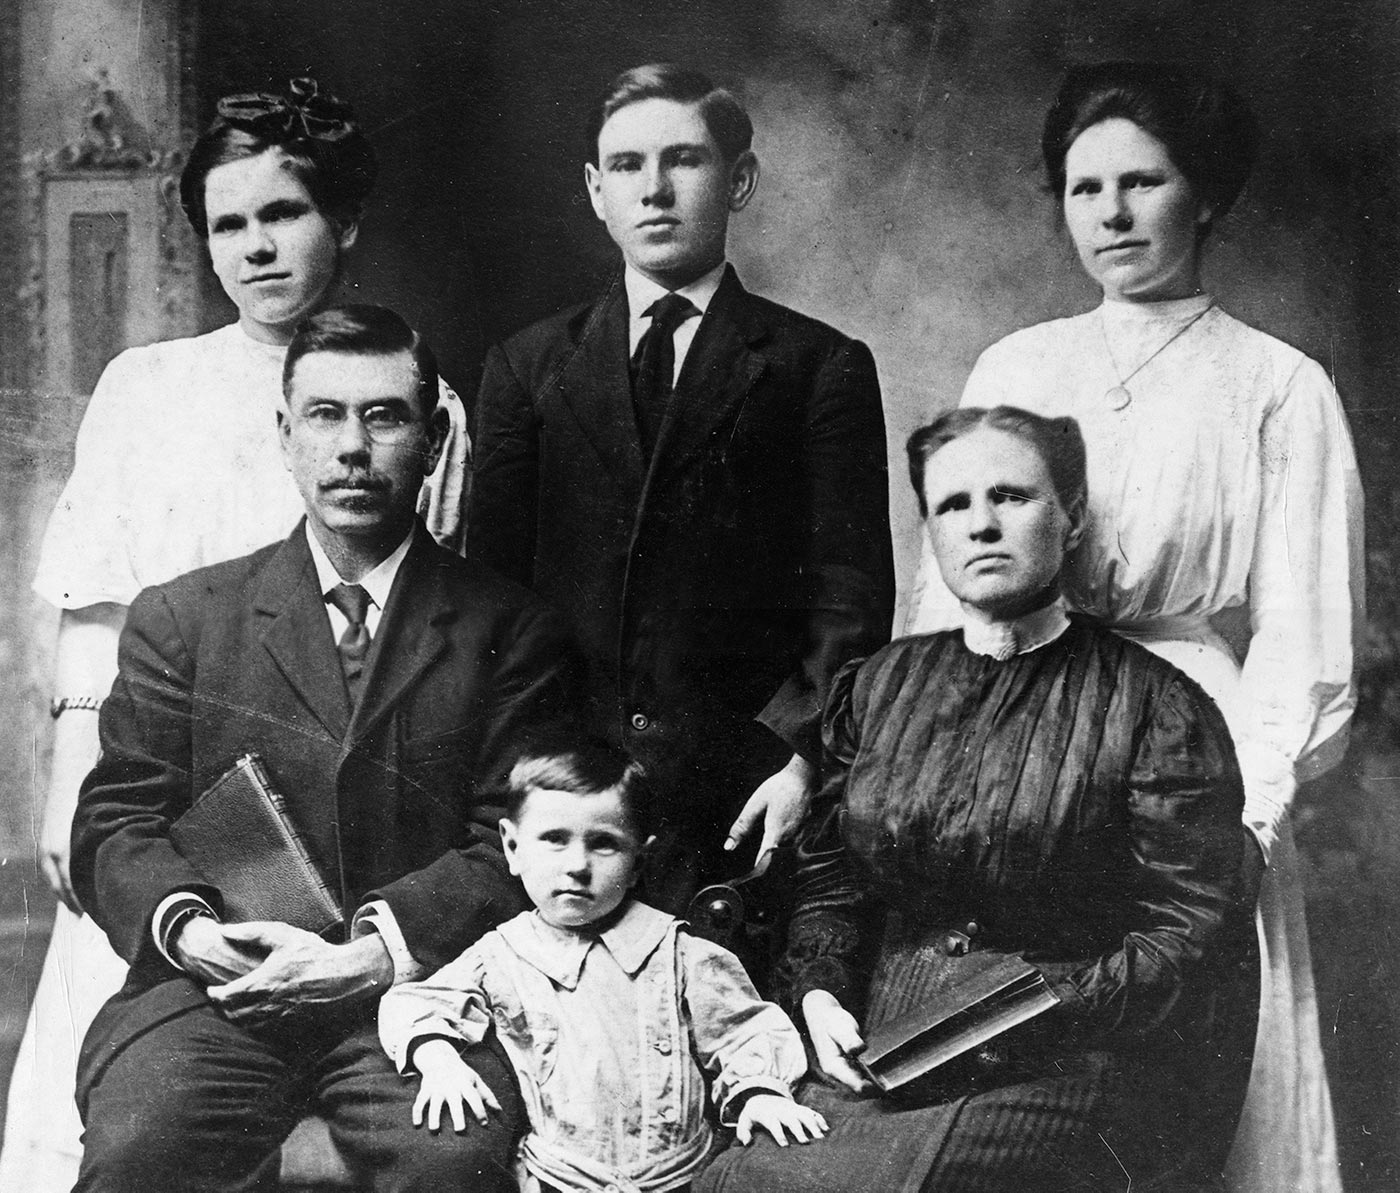 A. J. Tomlinson family about 1910